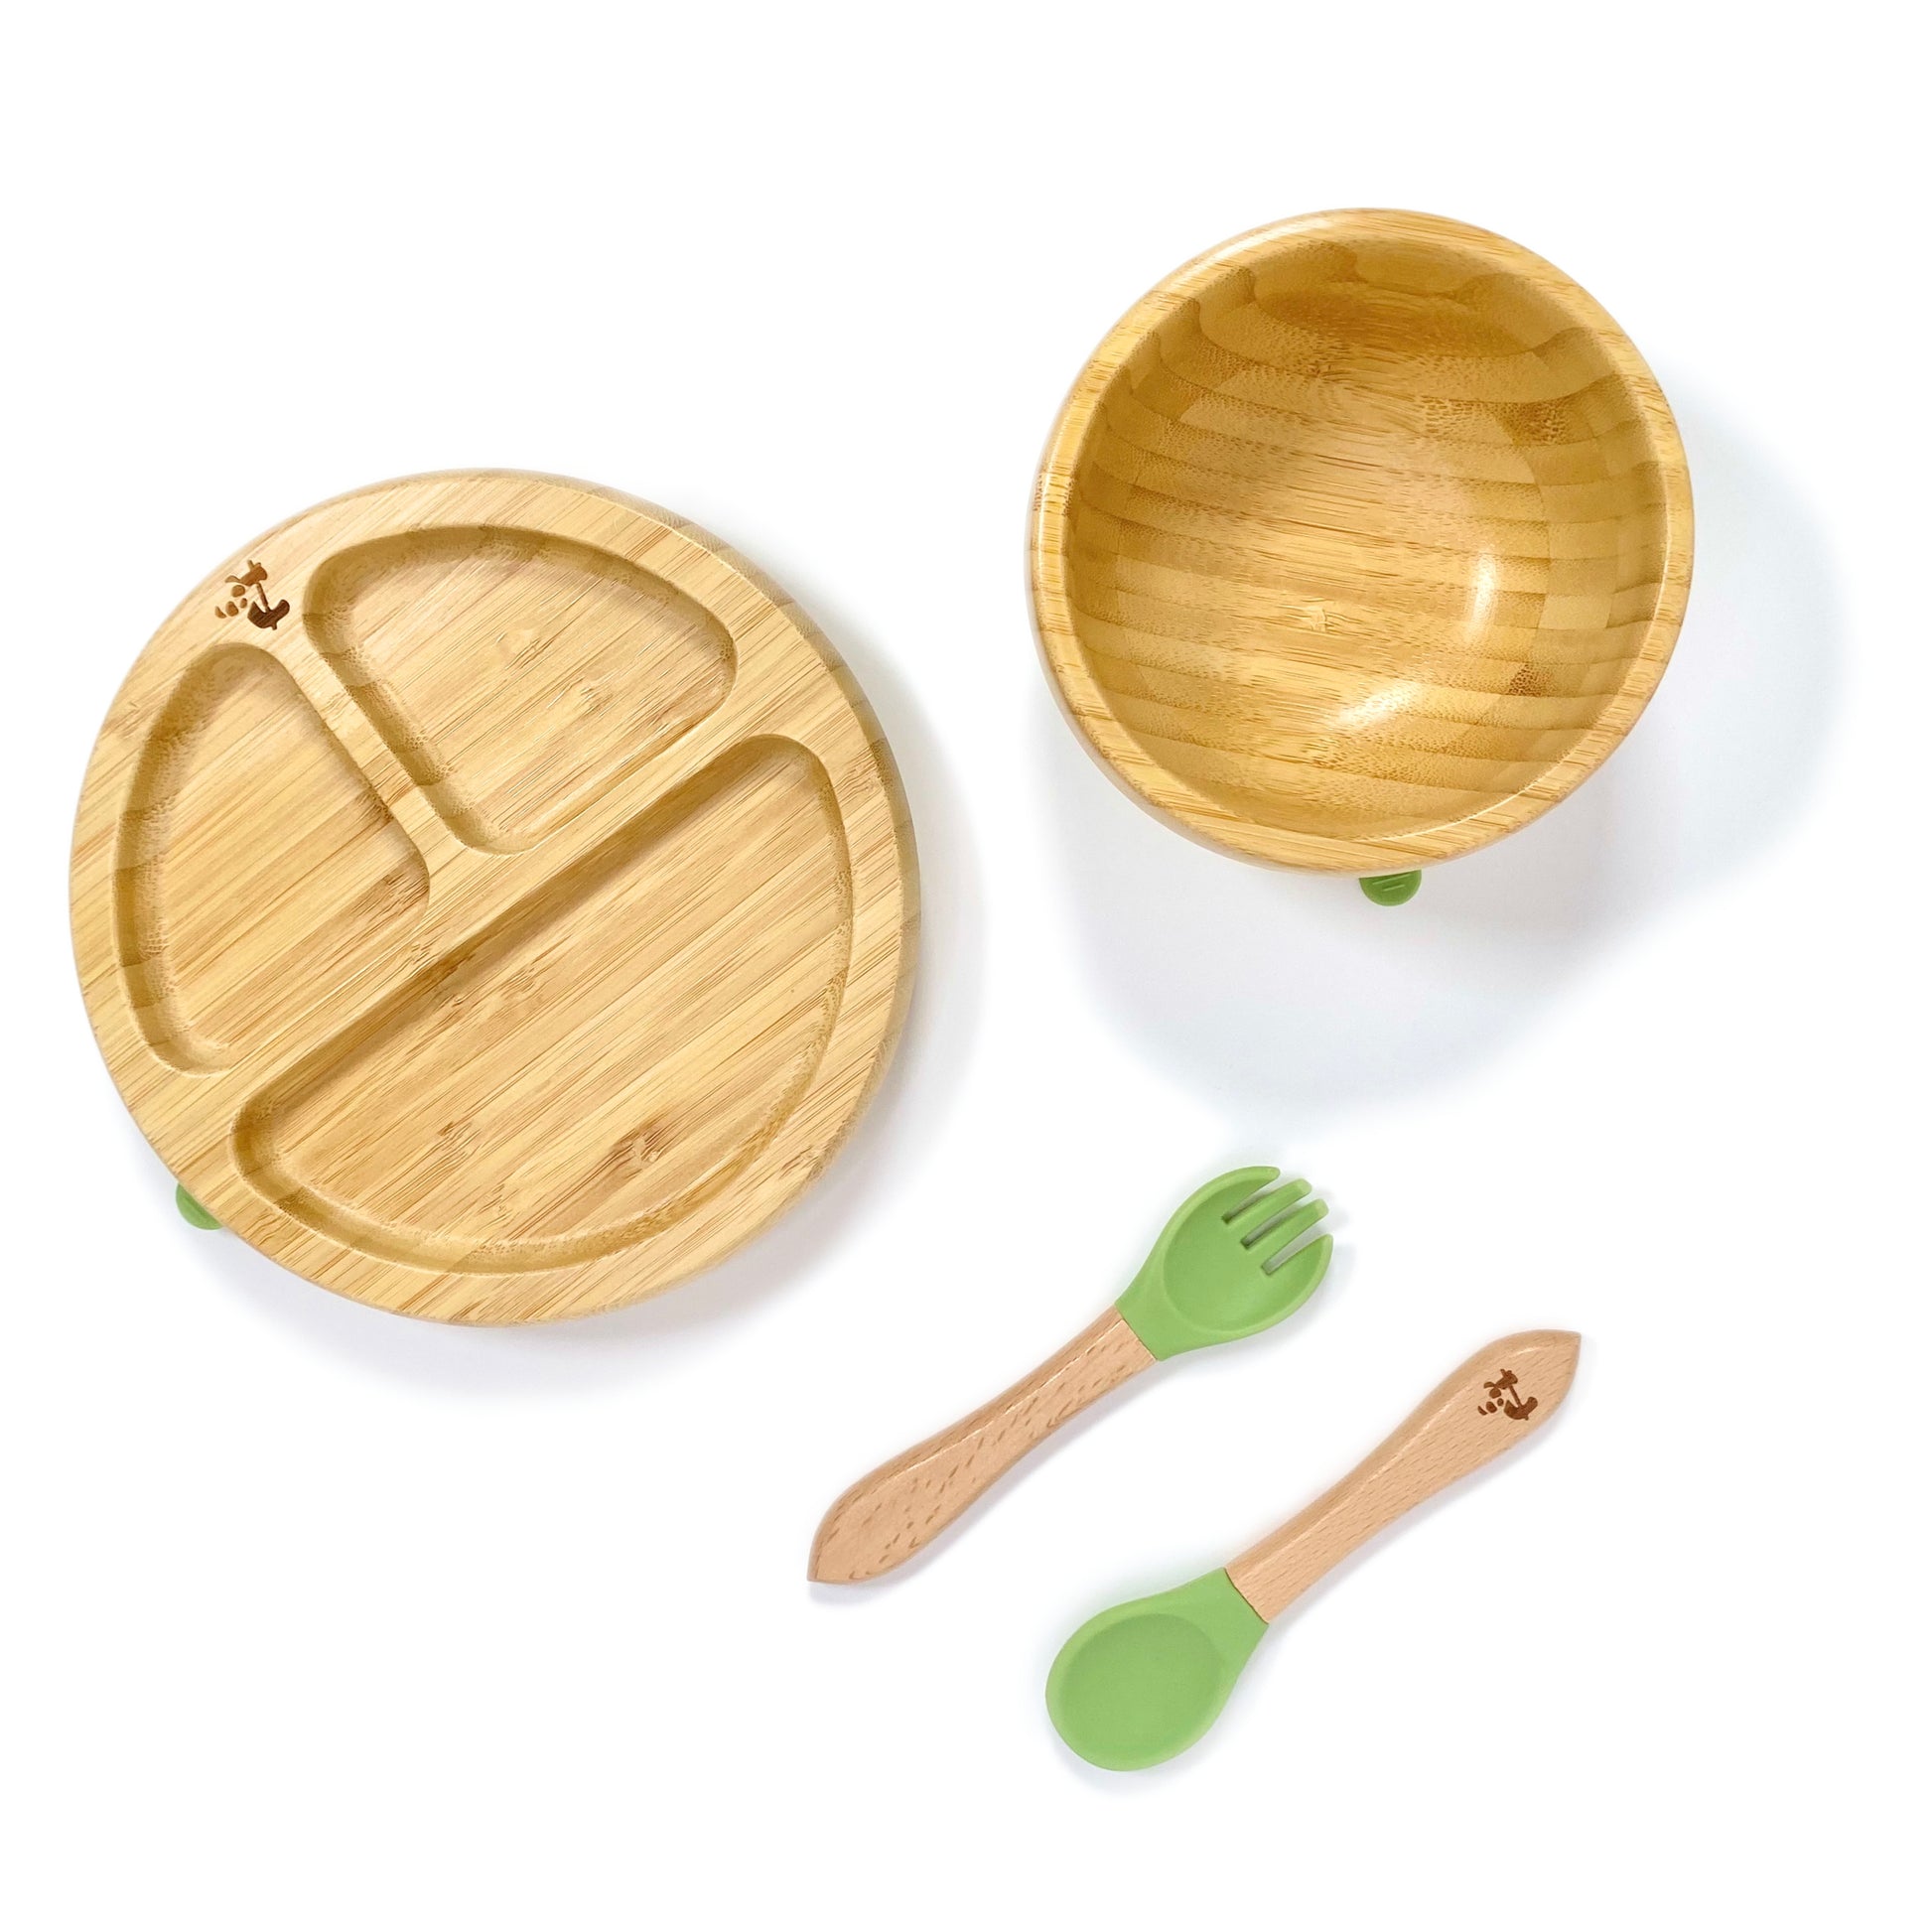 A children’s bamboo tableware set, including bamboo section plate with olive green silicone suction ring, bamboo bowl with olive green silicone suction ring and matching bamboo and silicone cutlery.